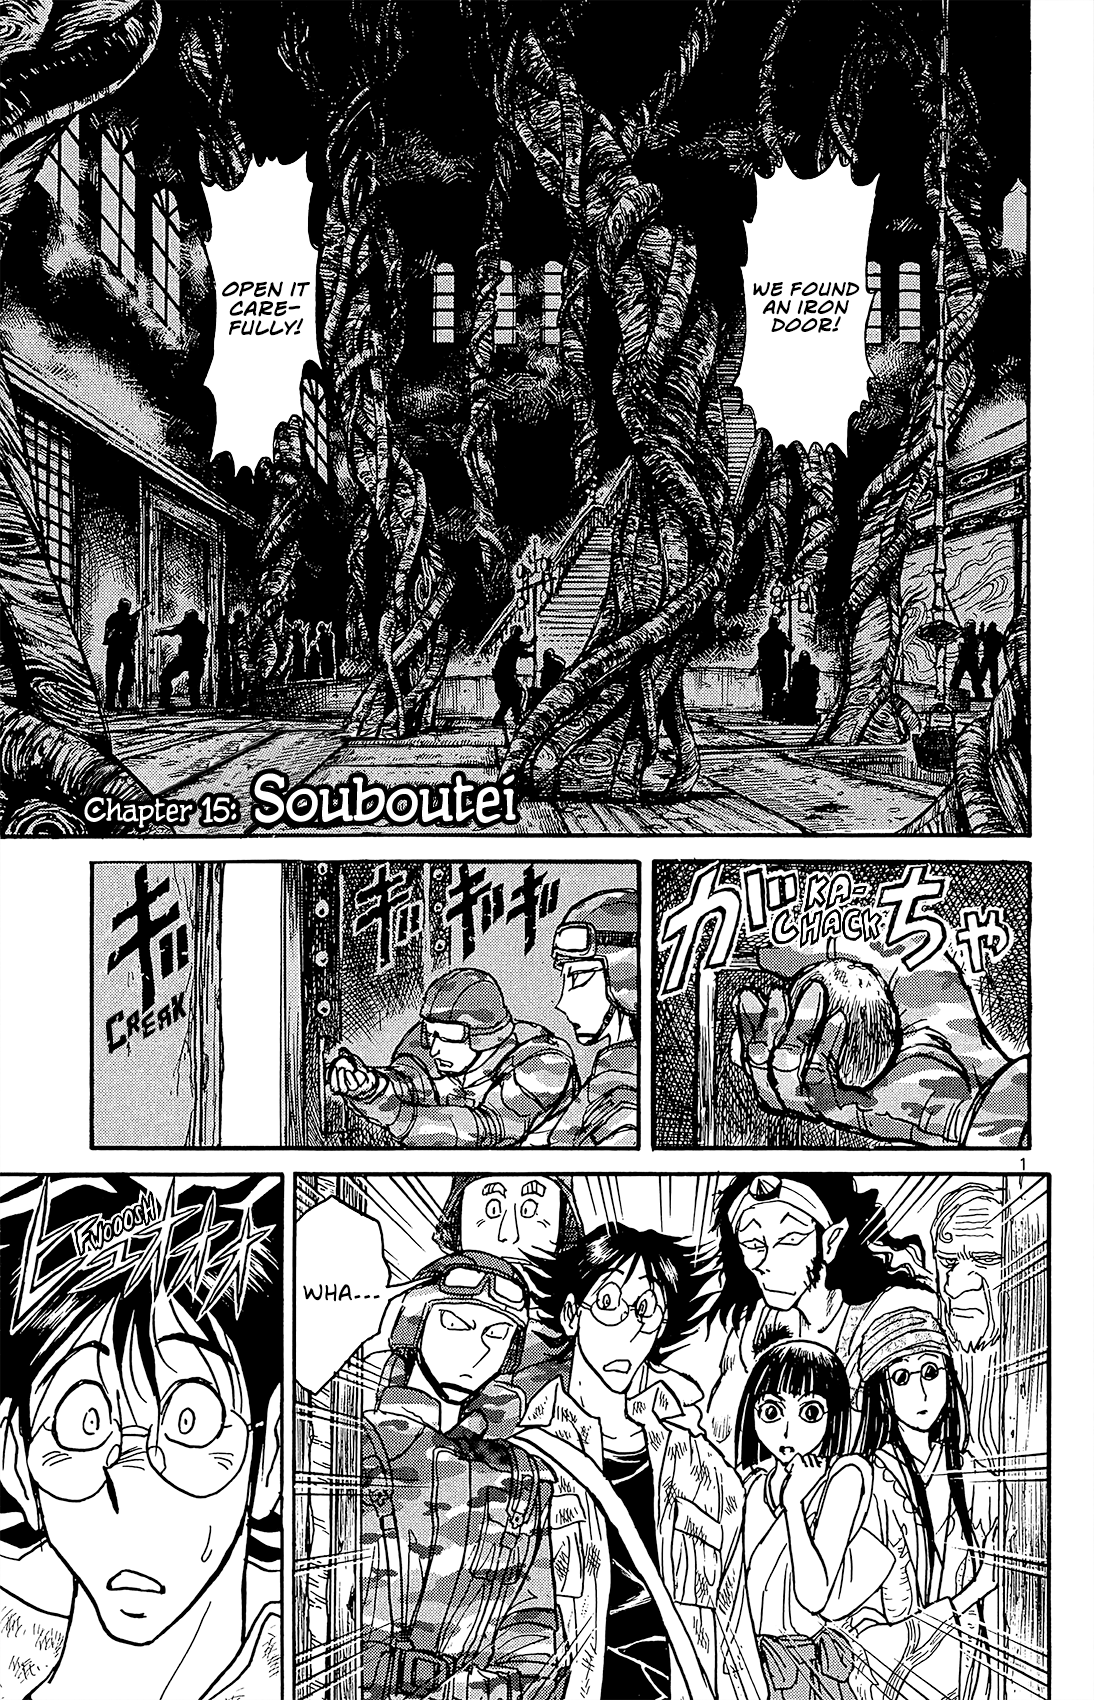 Souboutei Must Be Destroyed Vol.2 Chapter 15: Souboutei - Picture 2